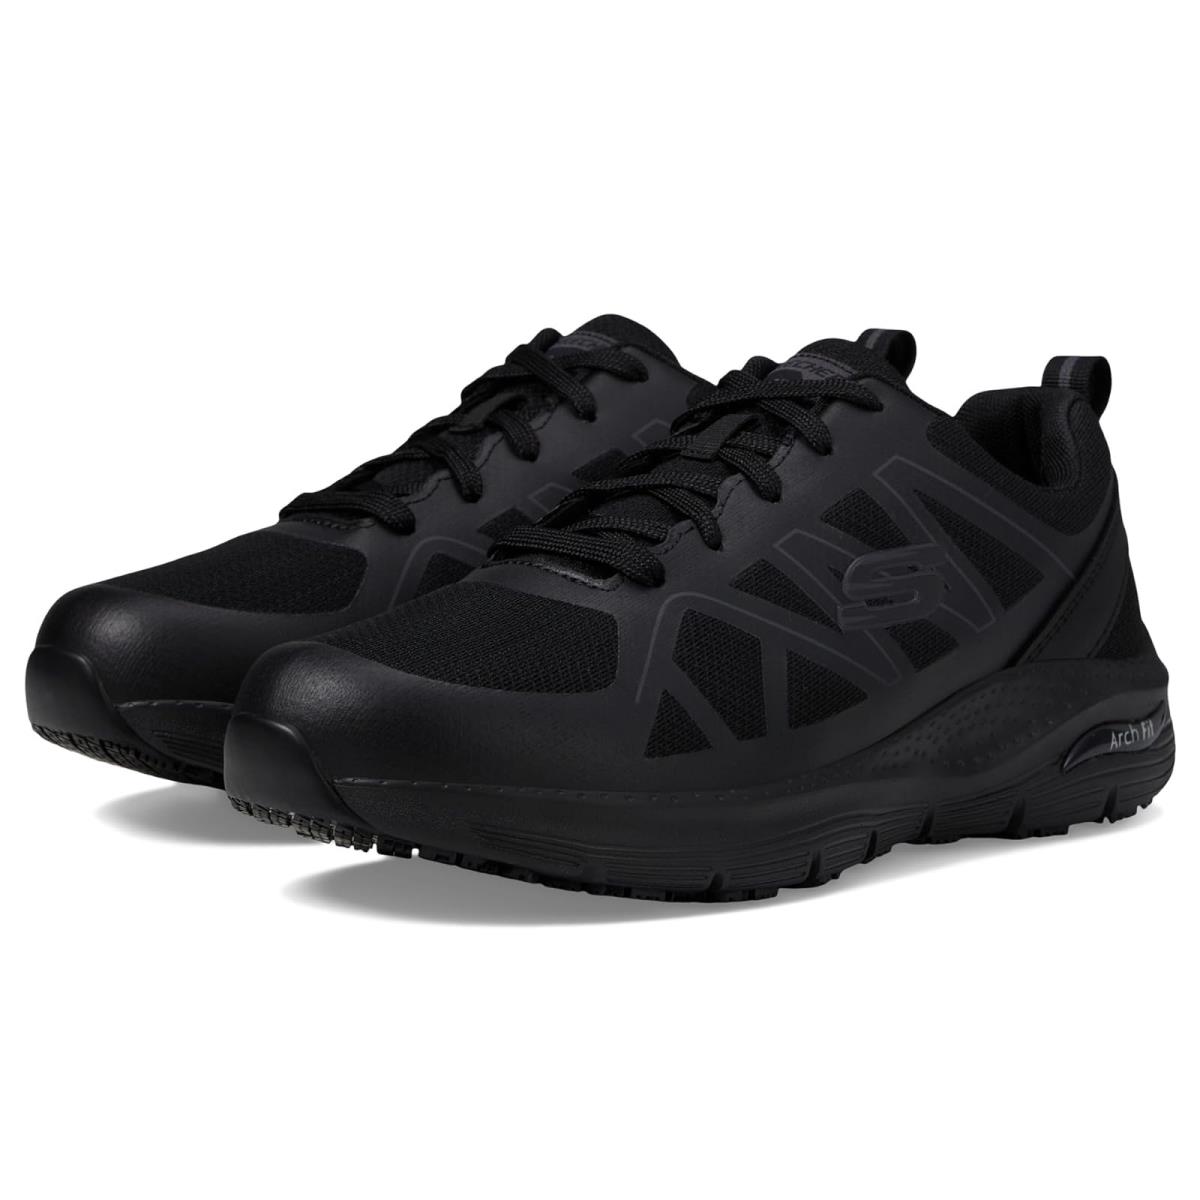 Man`s Sneakers Athletic Shoes Skechers Work Arch Fit SR - Axtell Black